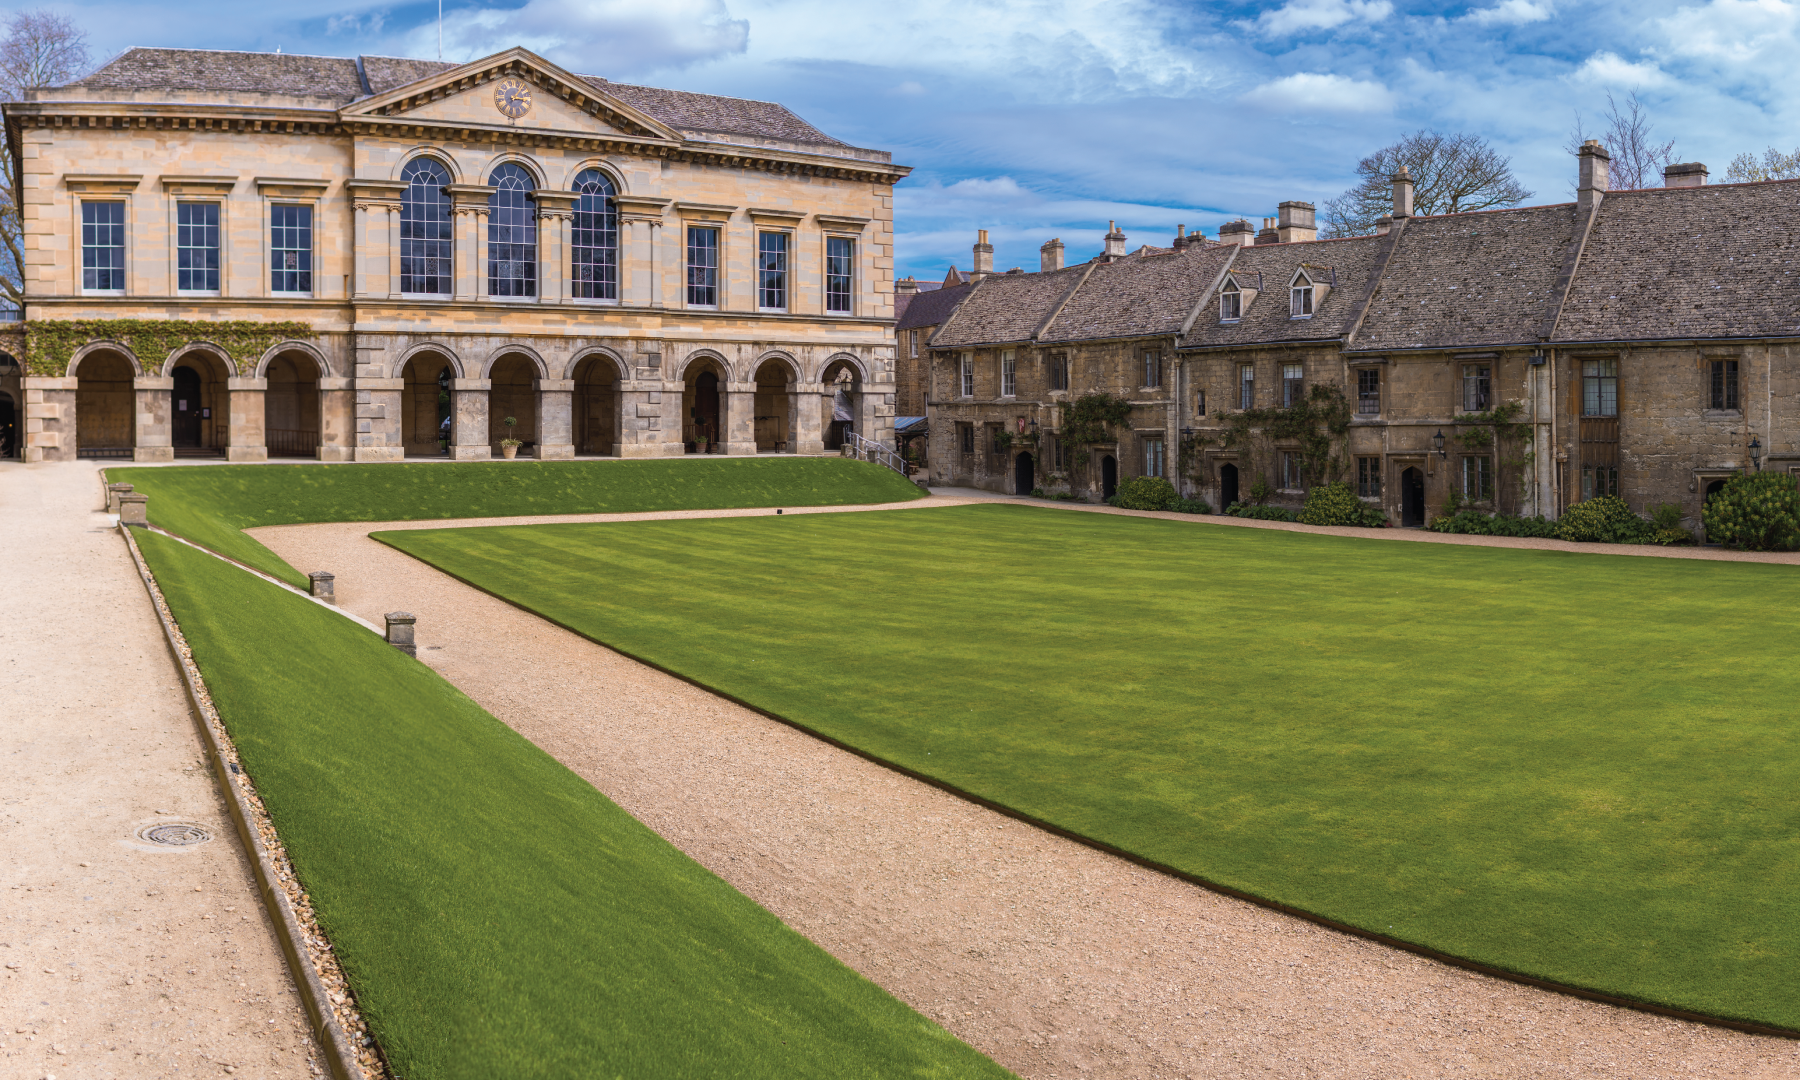 Grassy quad and buildings of Worcester College, Oxford University, U.K.